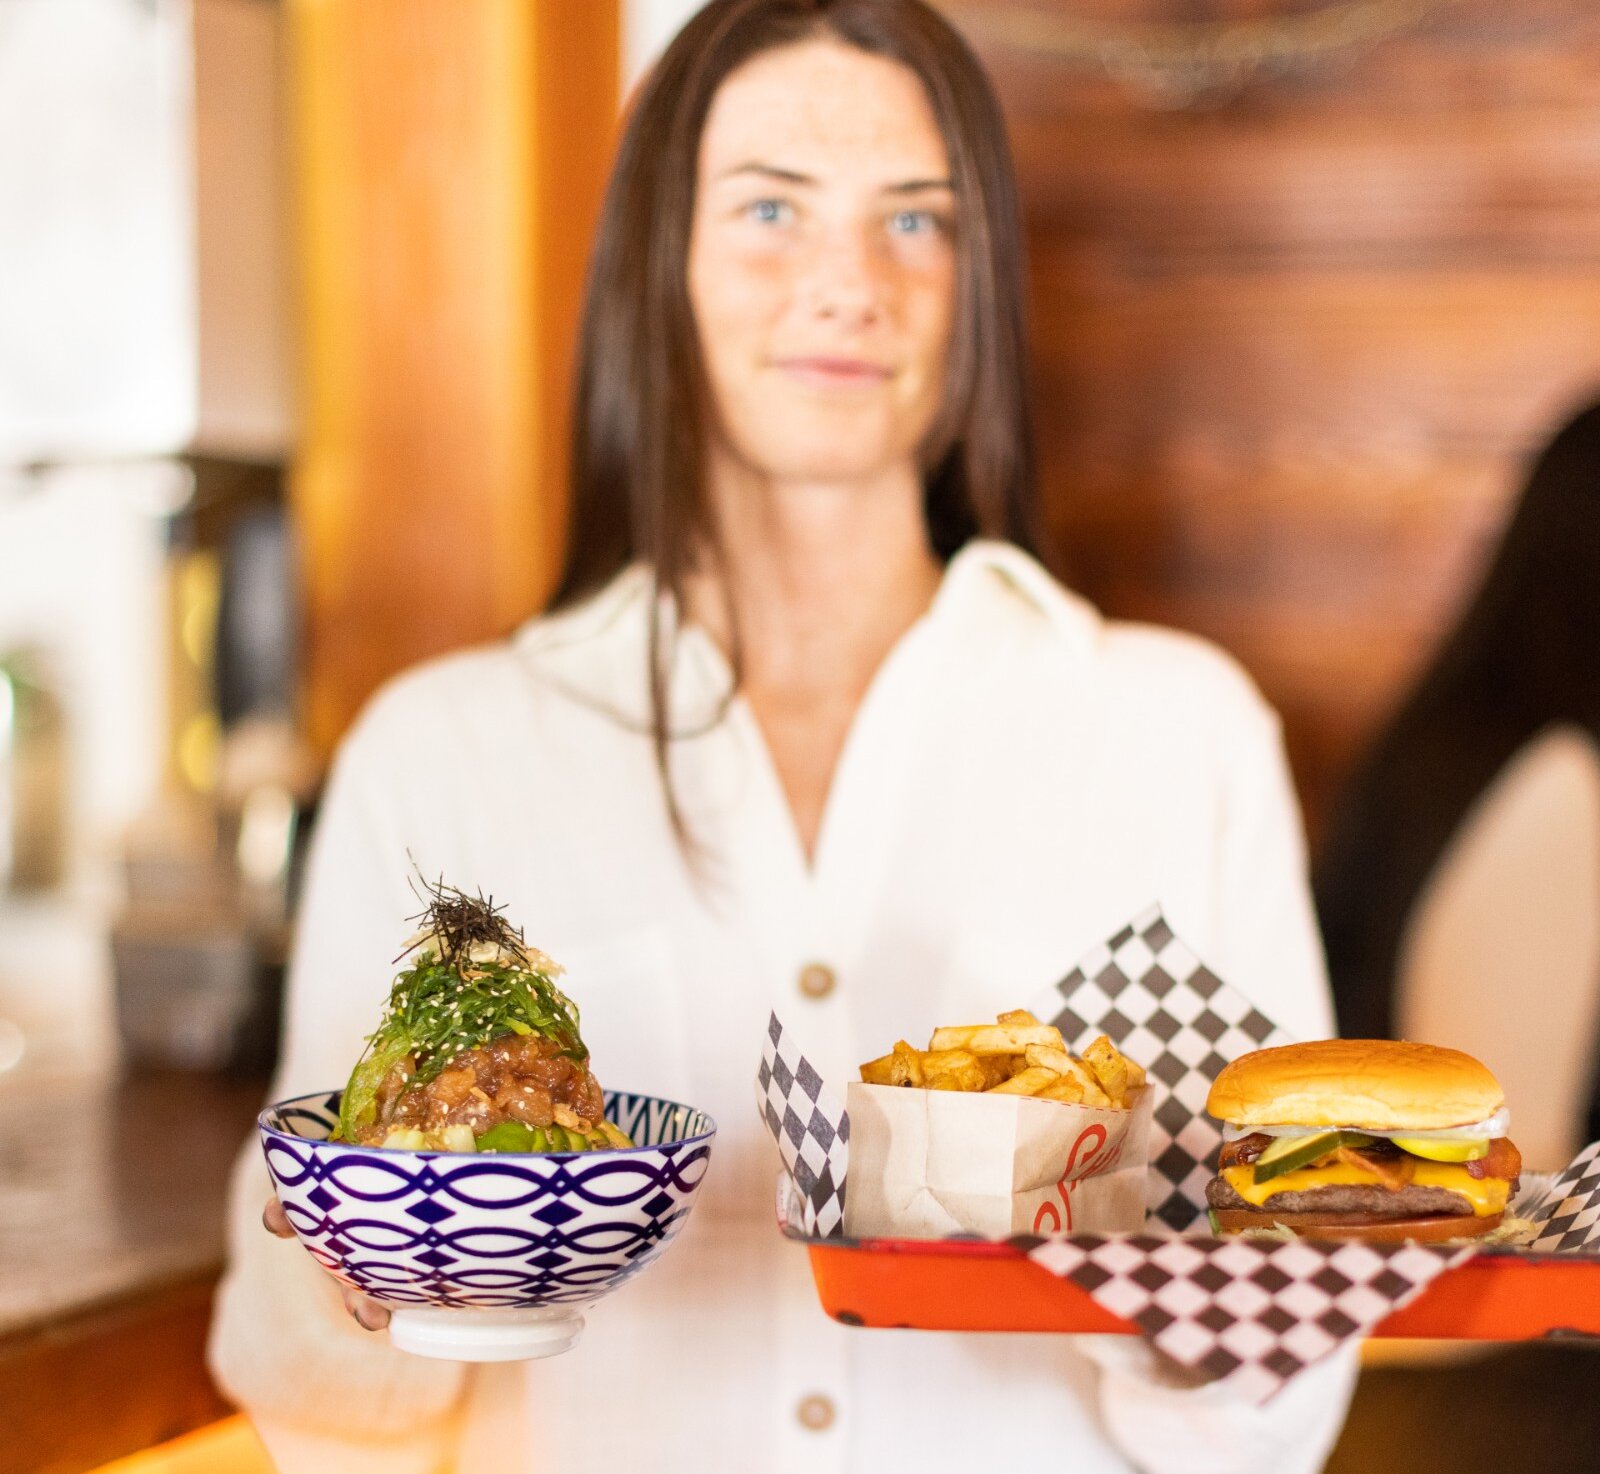 Woman with long hair and freckles holding a poke bowl and a tray with a burger and fries.